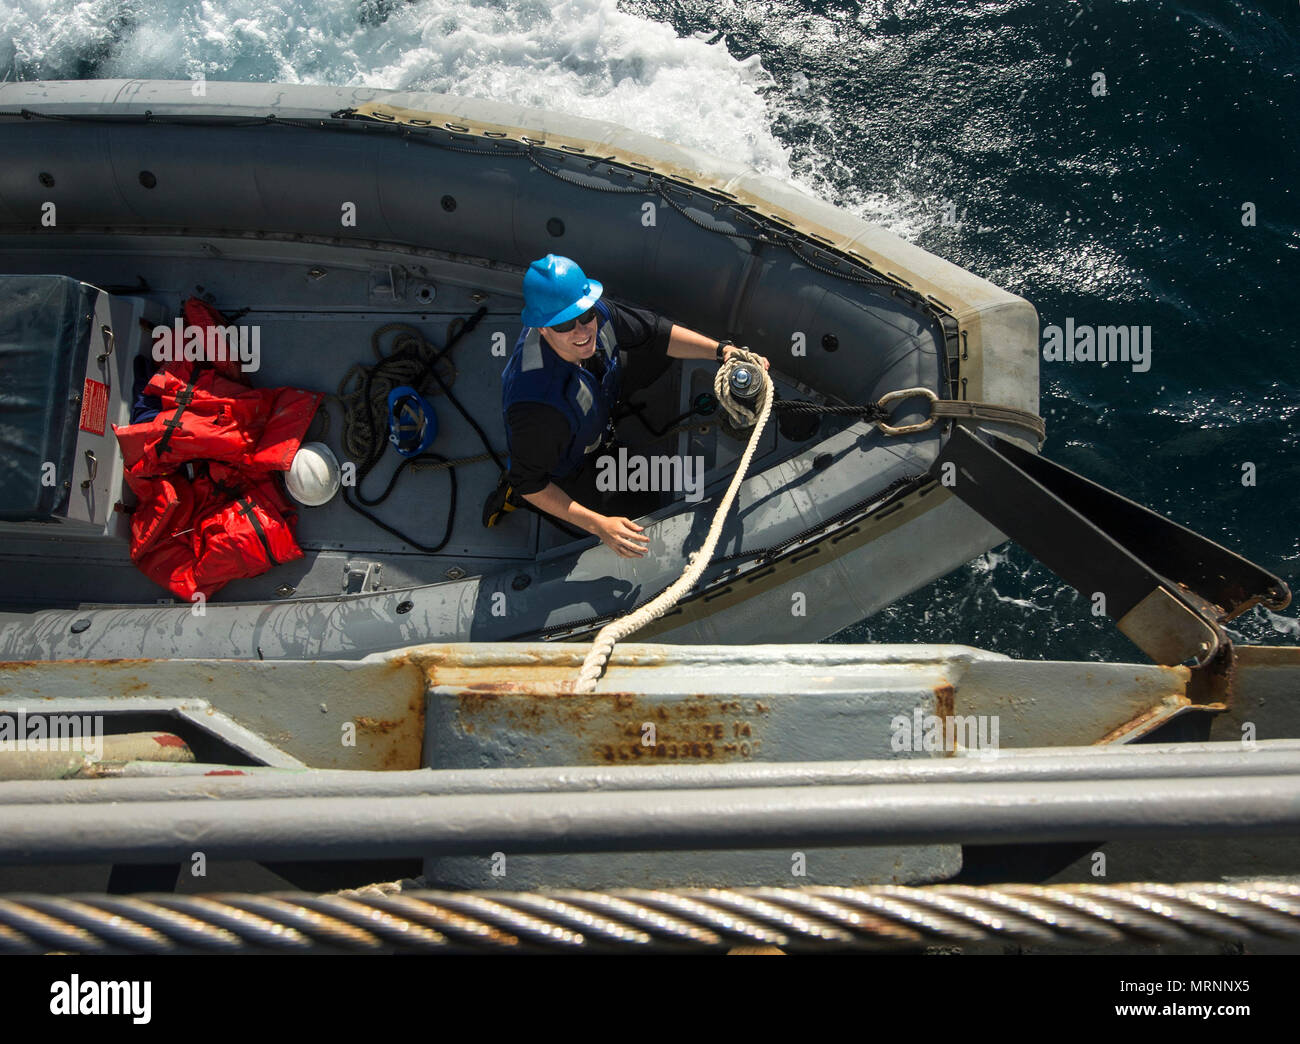 ARABIAN GULF (June 20, 2017) Engineman 3rd Class Joshua Hohn, assigned to the coastal patrol ship USS Firebolt (PC 10), works to secure a line on a rigid-hull inflatable boat as it pulls alongside the guided-missile cruiser USS Vella Gulf (CG 72for a personnel transfer during Exercise Spartan Kopis 17.  Exercise Spartan Kopis is a Task Force (TF) 55-led exercise between the U.S. Navy and U.S. Coast Guard in order to increase tactical proficiency, broaden levels of cooperation, enhance mutual capability and support long-term security and stability in the region. Vella Gulf is deployed to the U. Stock Photo